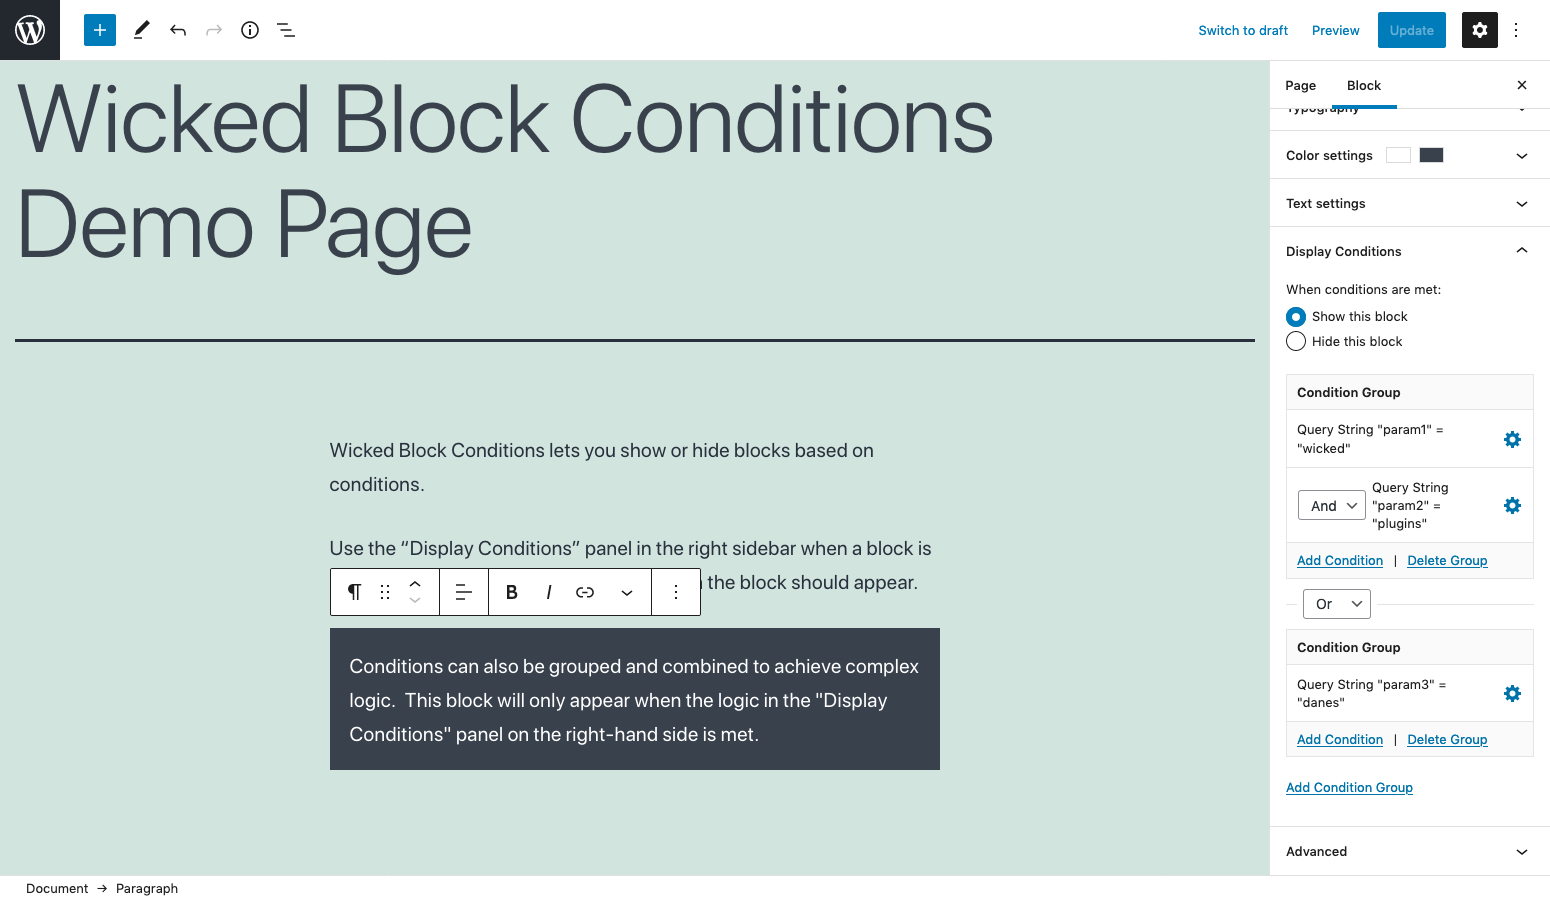 Use and/or operators and group conditions for more complex conditional blocks